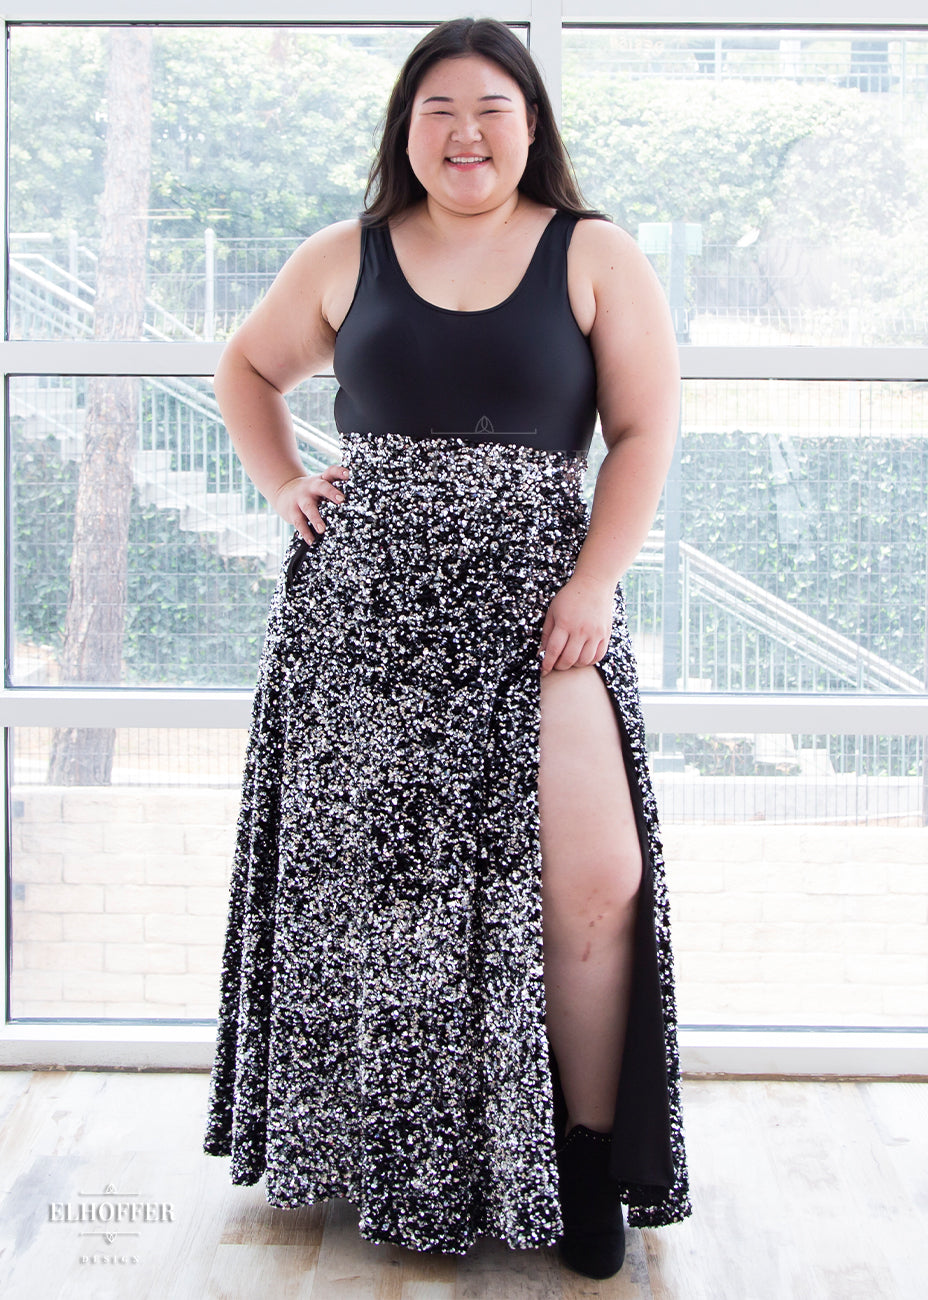 Ashley pairs the black bodysuit with a high waisted silver sequin skirt with thigh high slit and pockets.